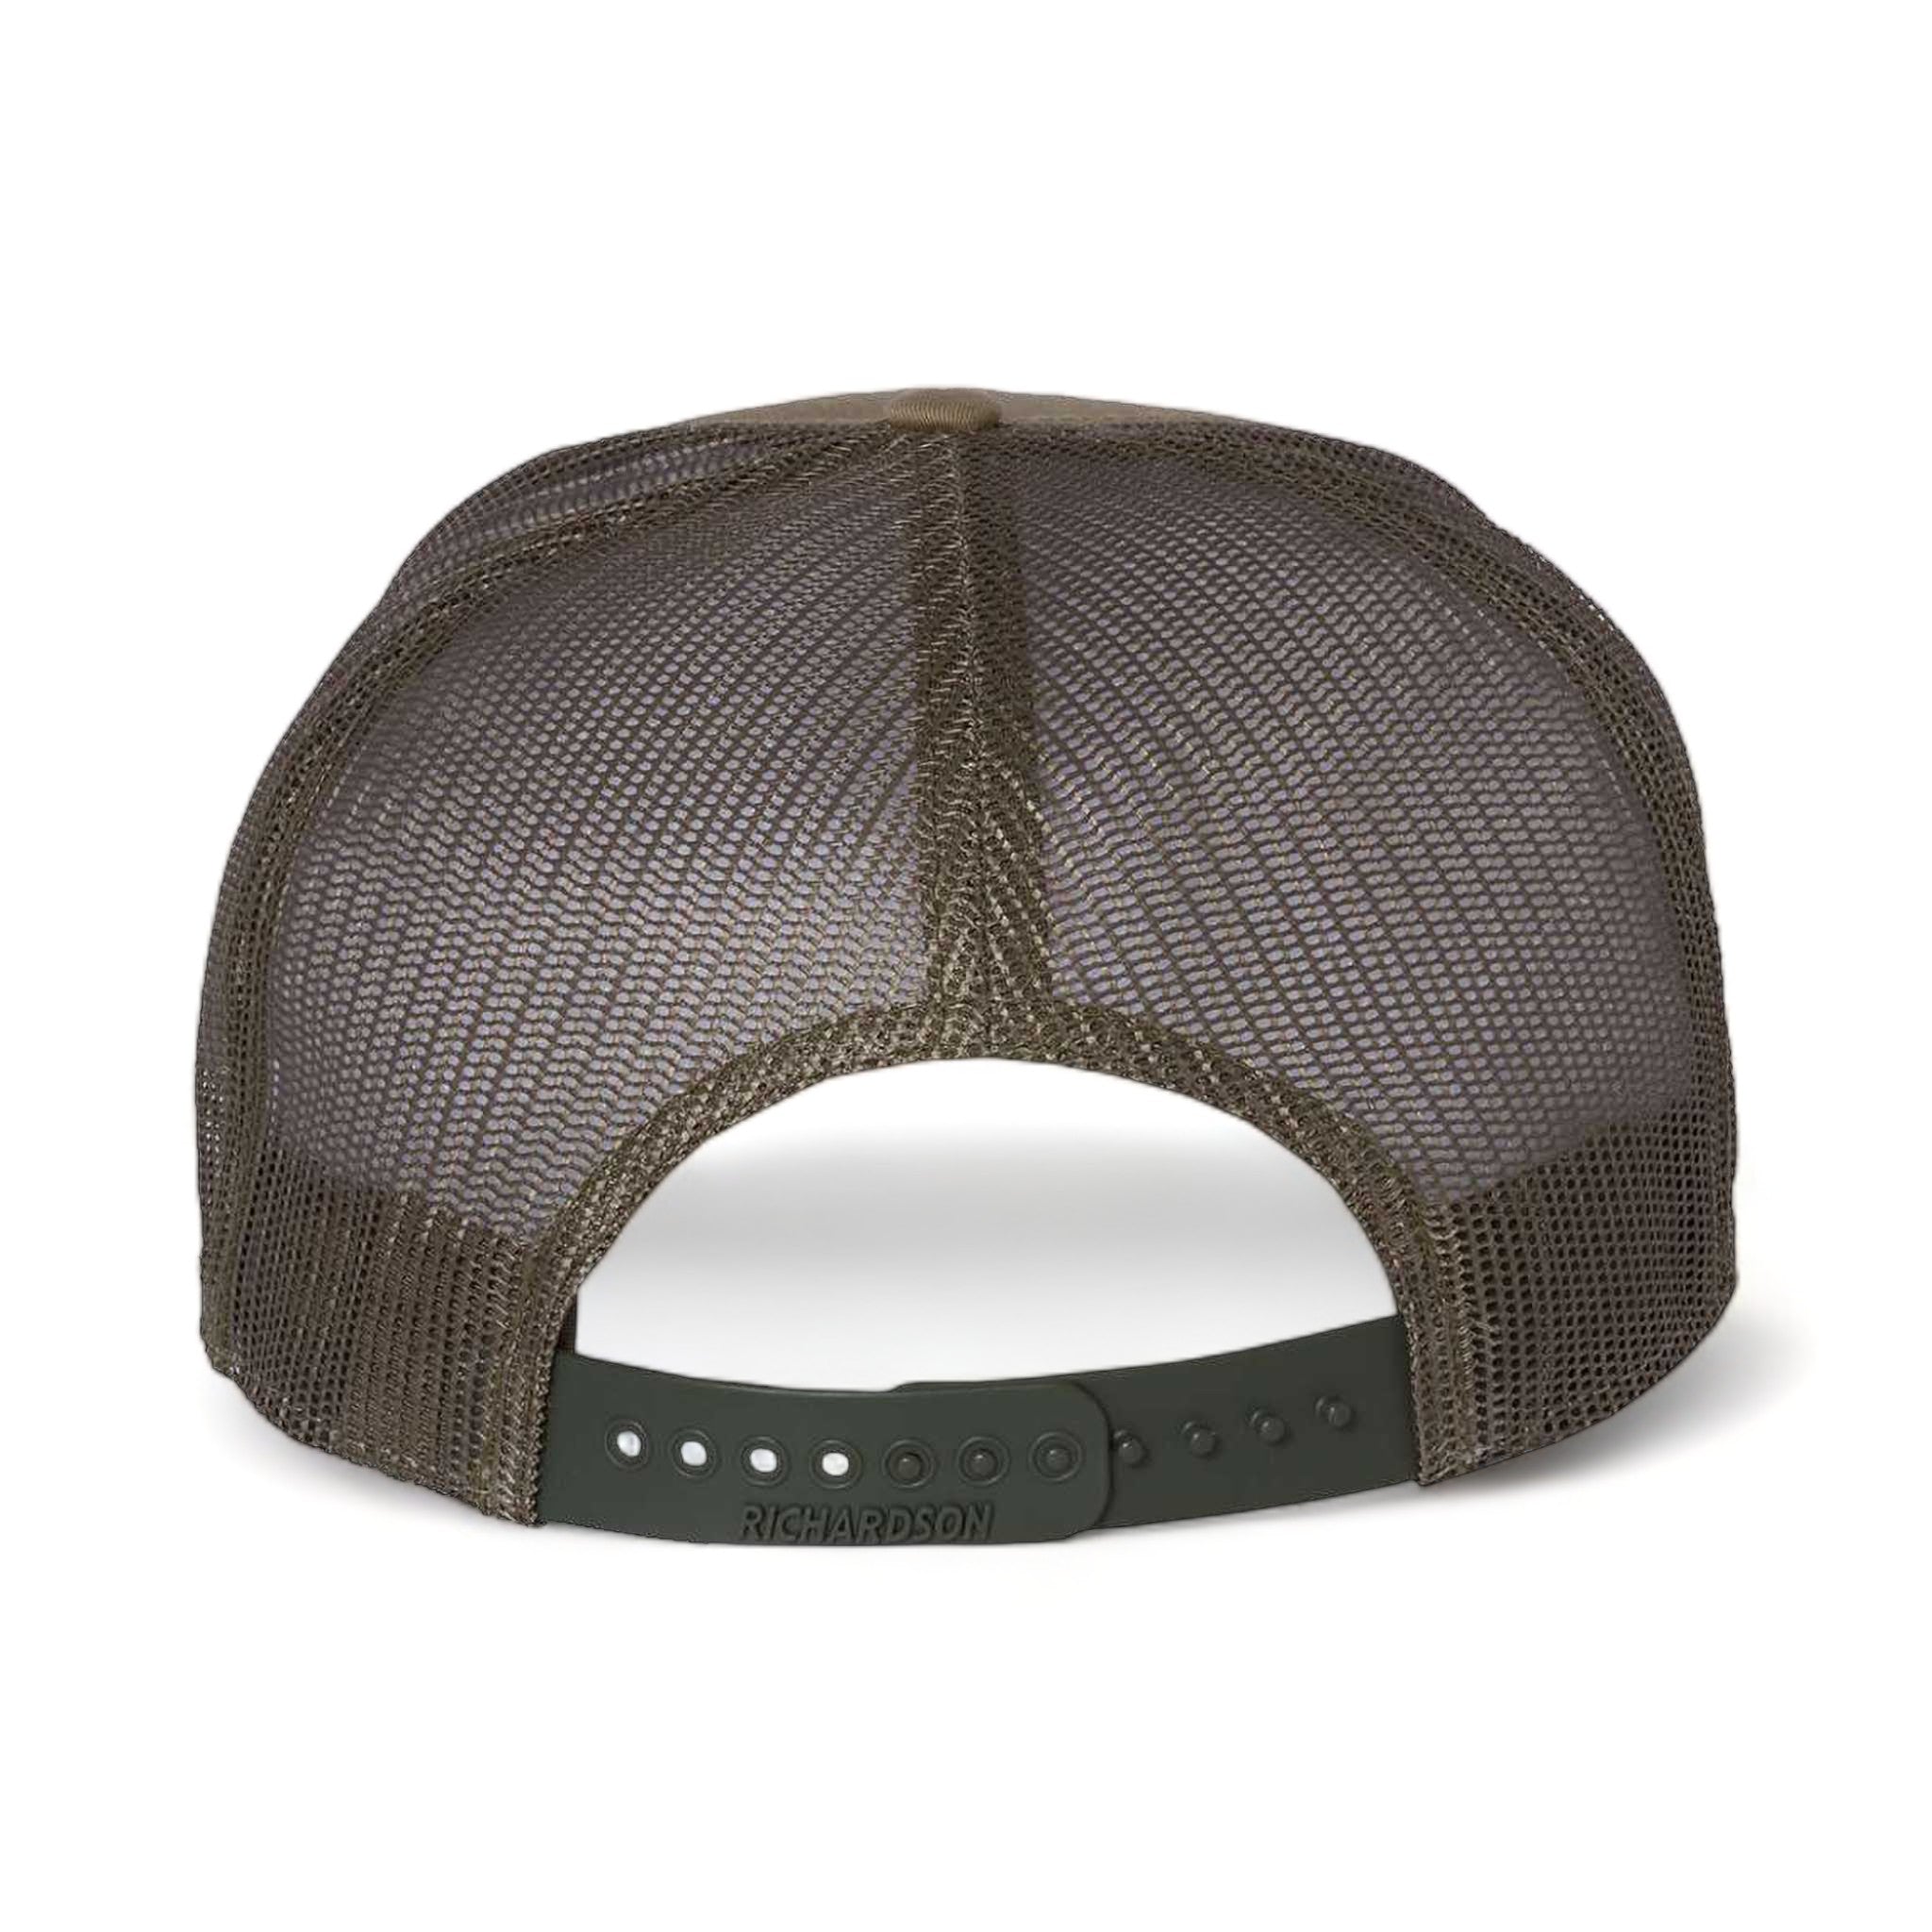 Back view of Richardson 168 custom hat in pale khaki and loden green